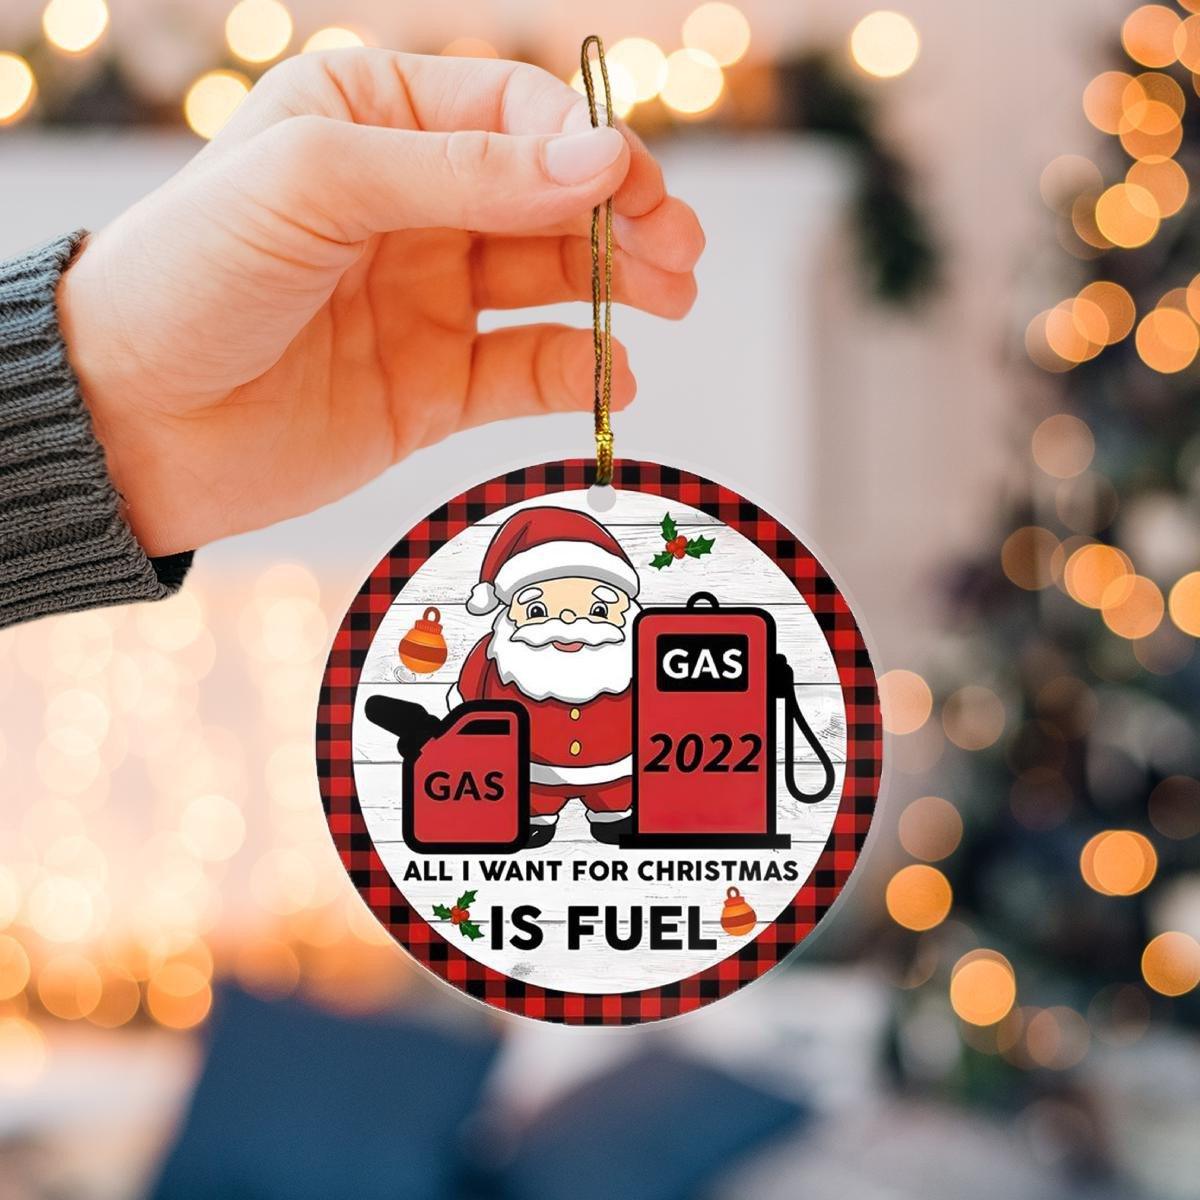 All i want for christmas is fuel mica ornament - Amzanimalsgift